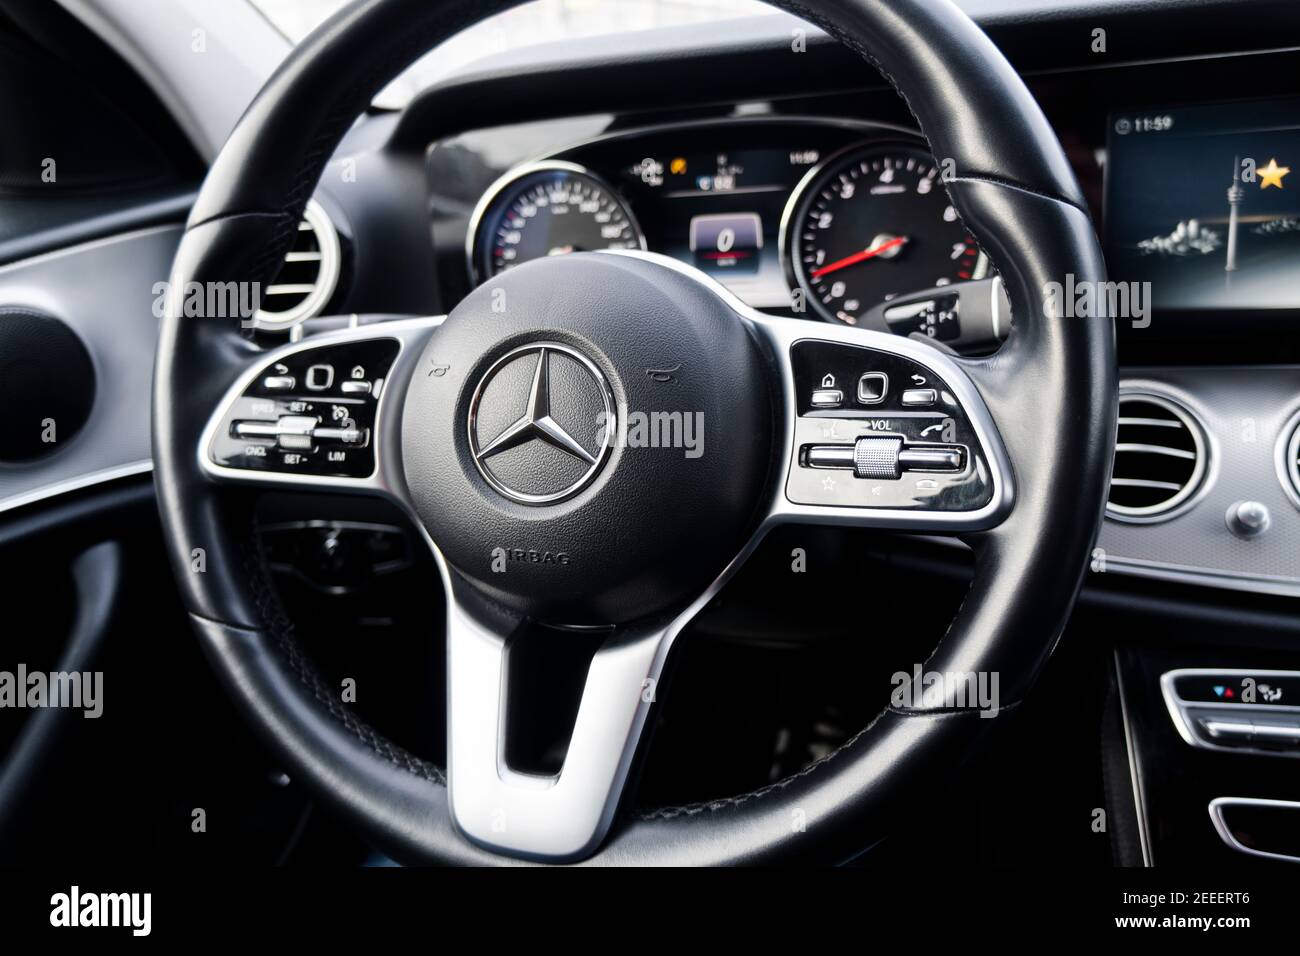 Sankt-Petersburg, Russia, February 10, 2021: Dashboard and steering wheel  with media control buttons of a Mercedes Benz E-class . Car interior detais  Stock Photo - Alamy